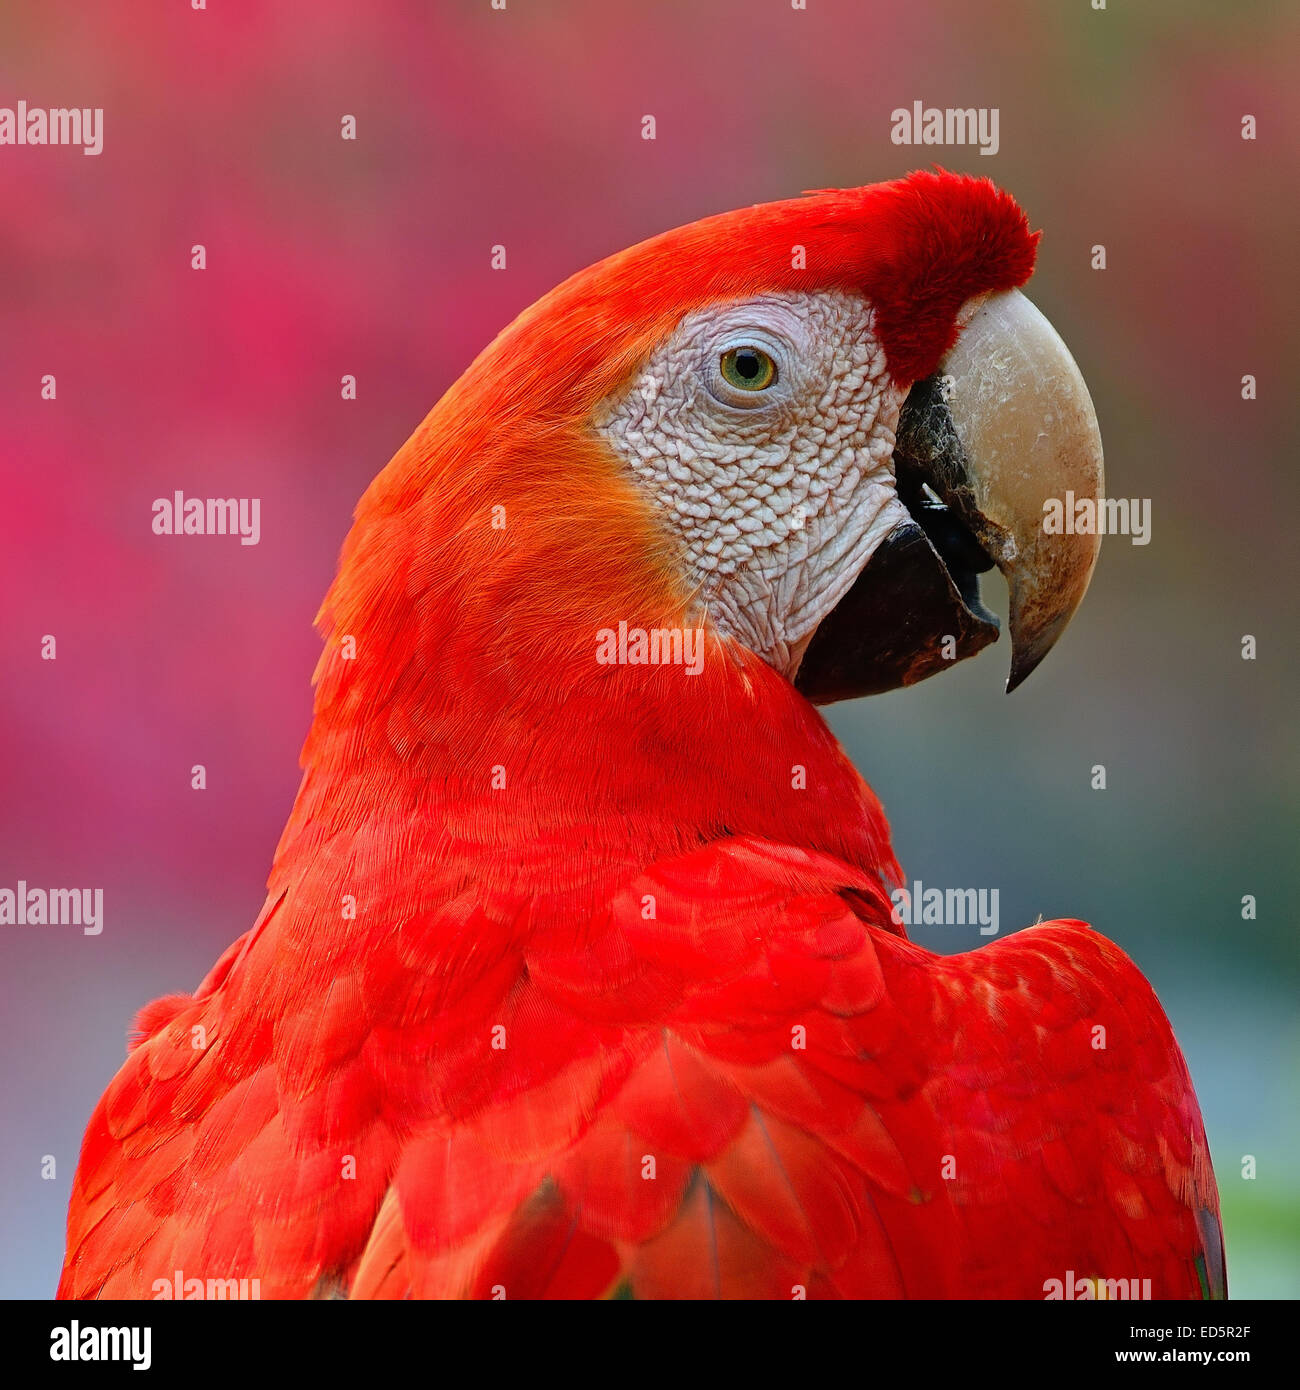 Colorful Scarlet Macaw aviary, back profile Stock Photo